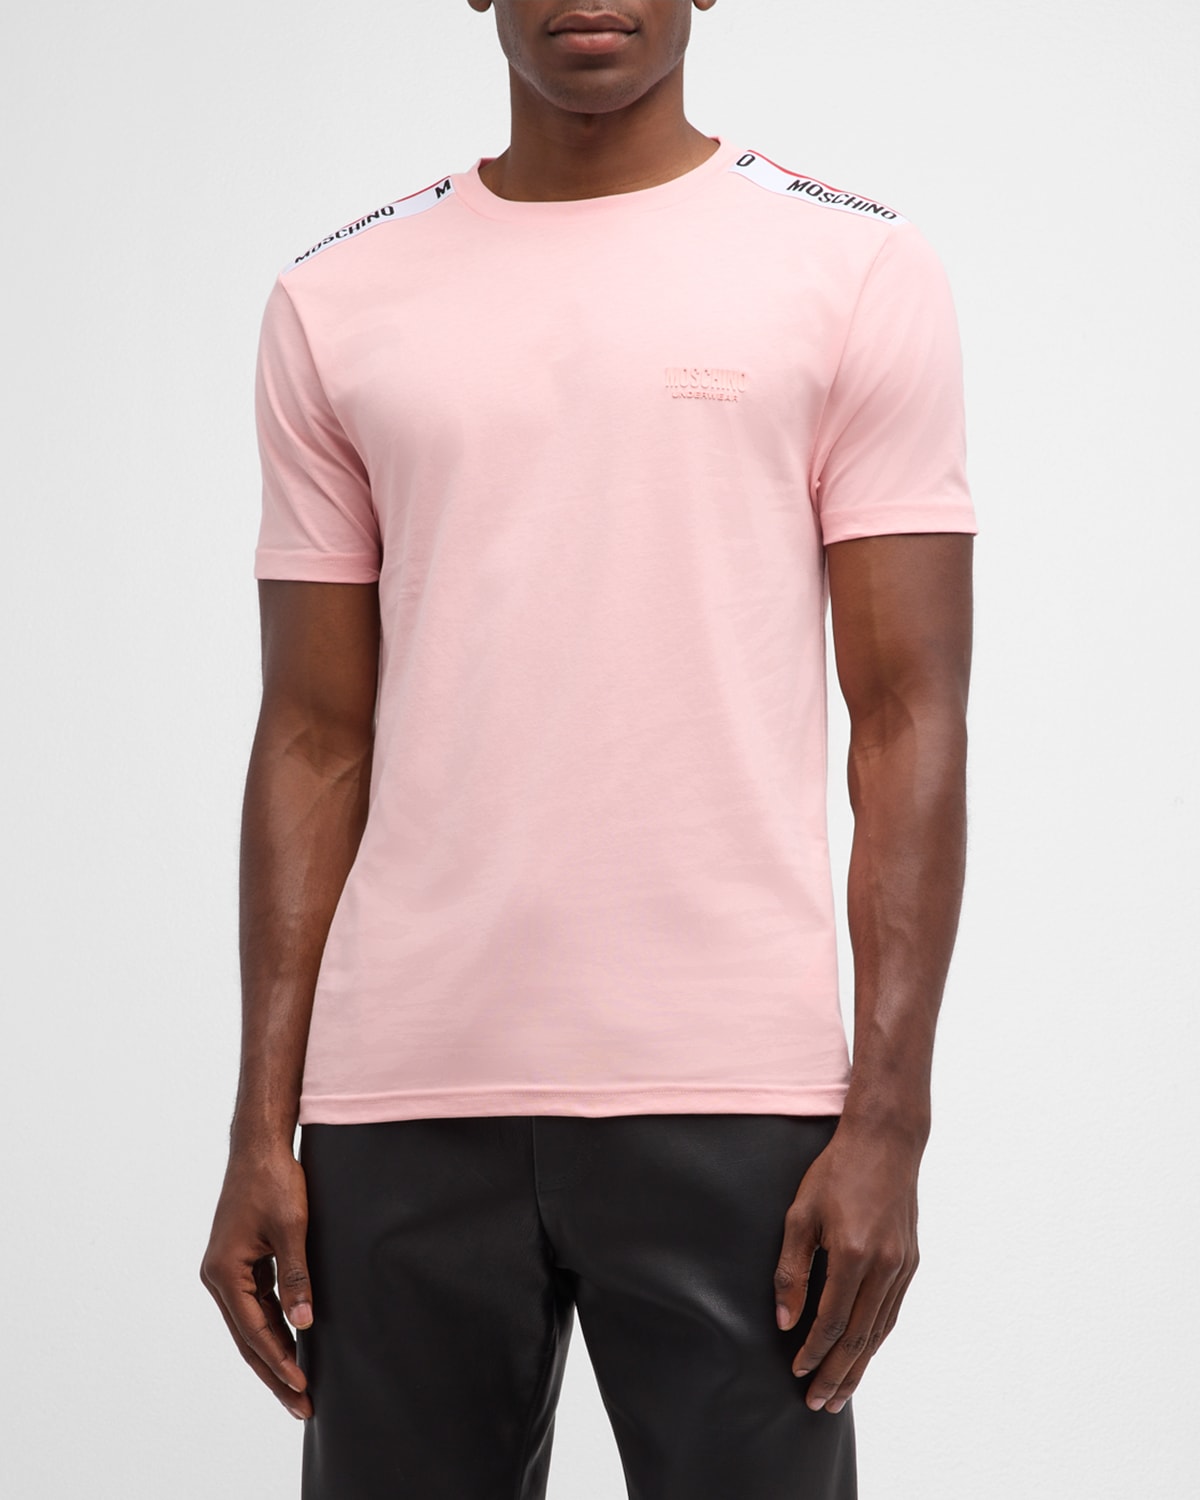 Moschino Men's T-shirt With Shoulder Taping In Pink